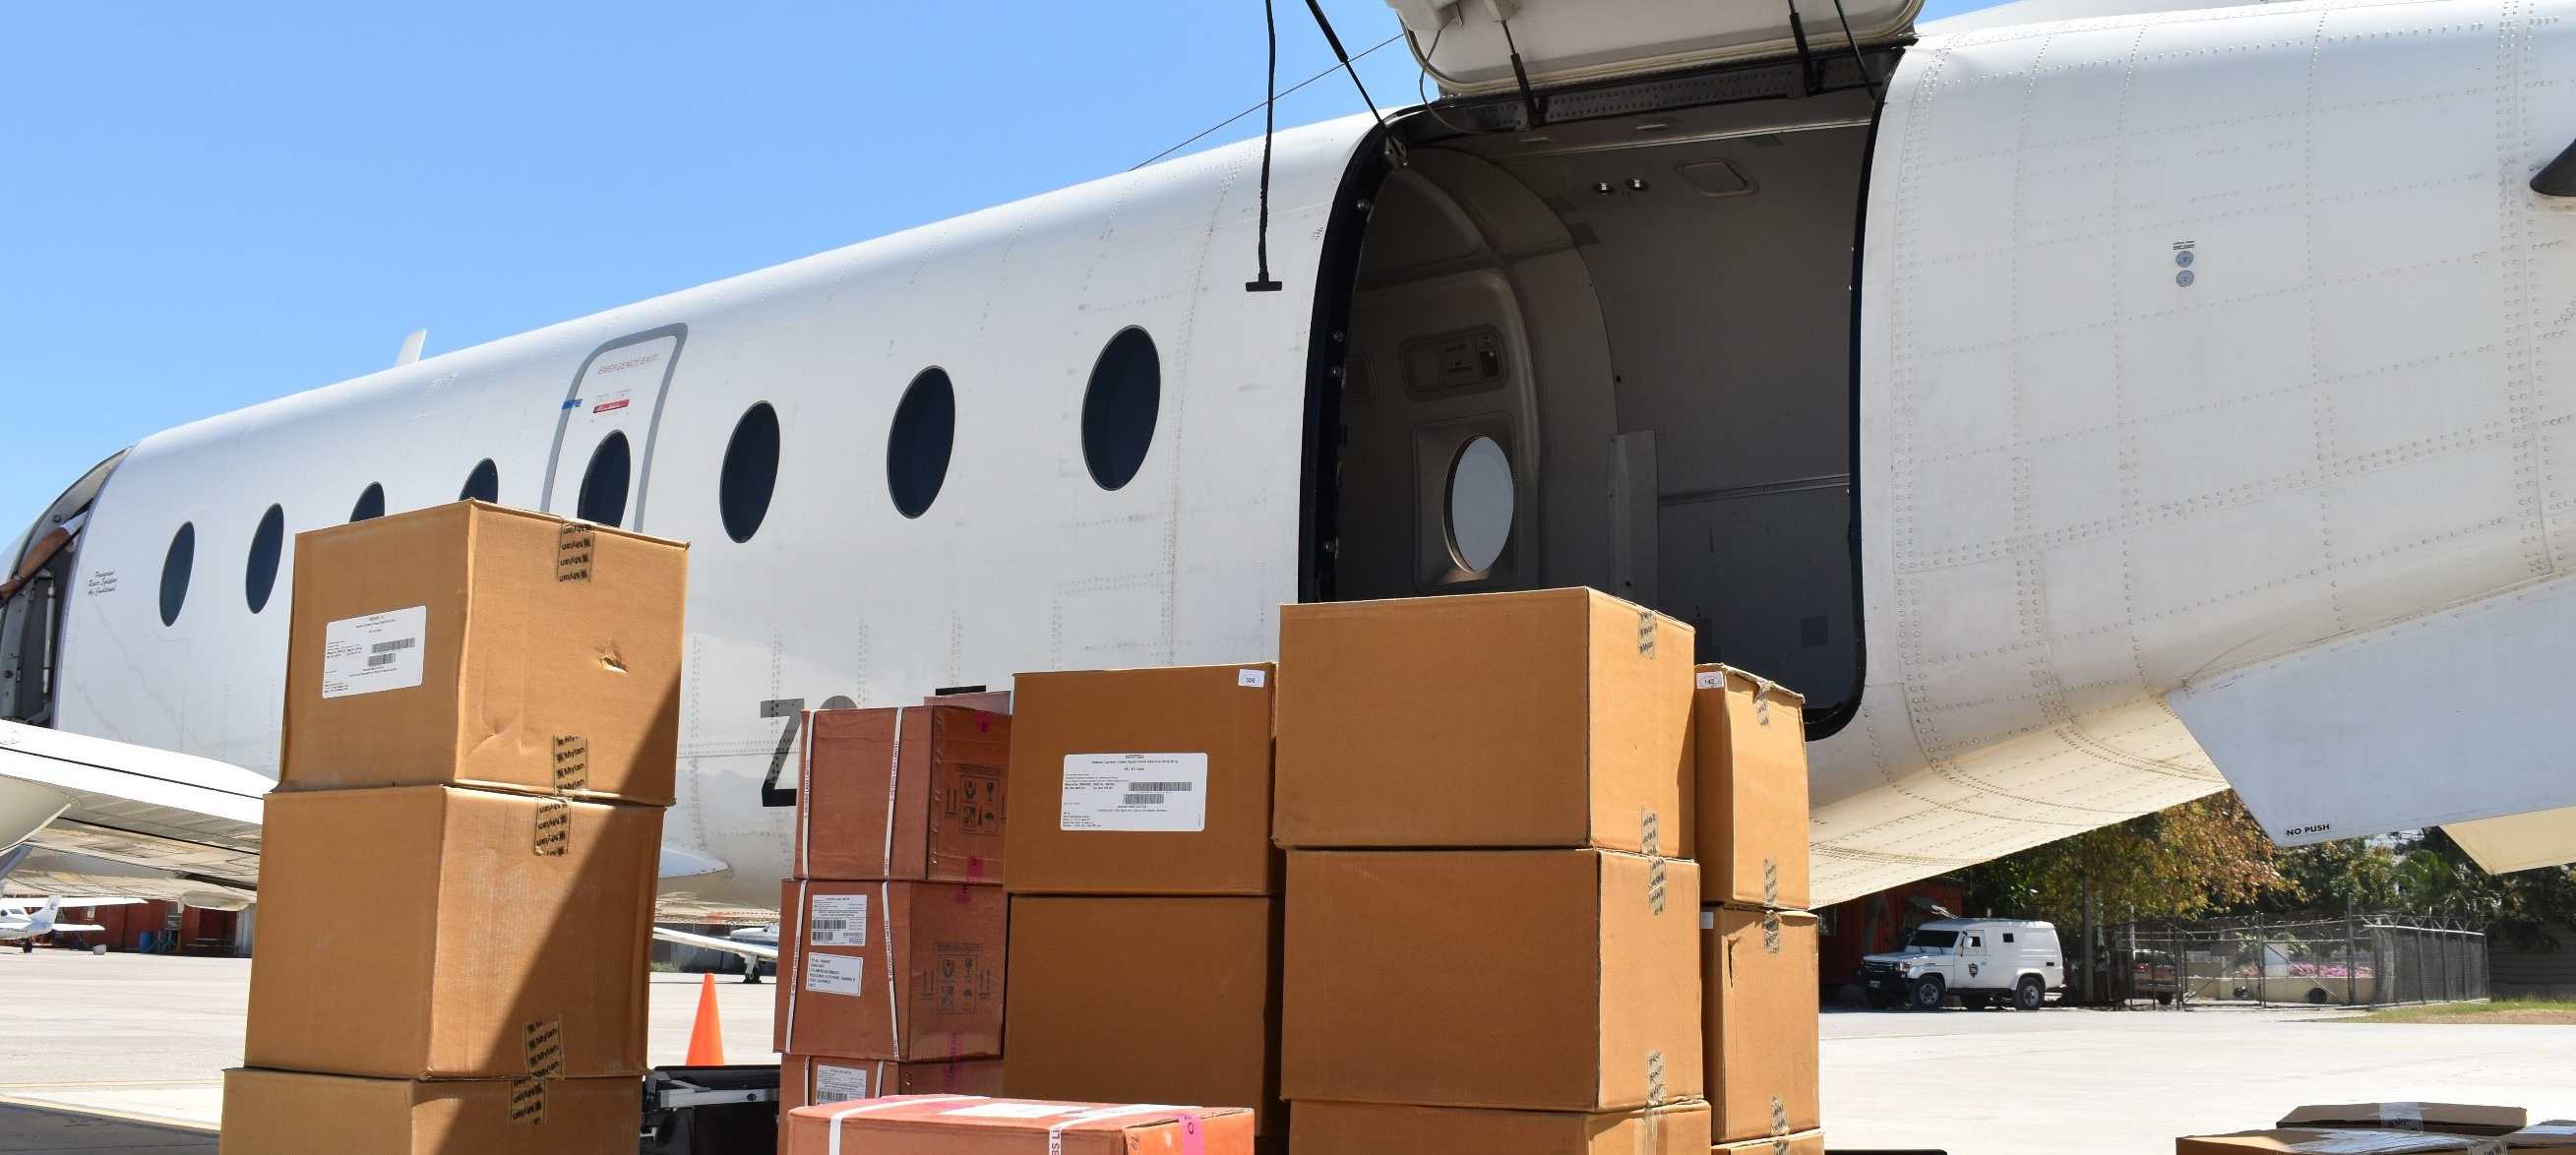 boxes sit in front of airplane for loading